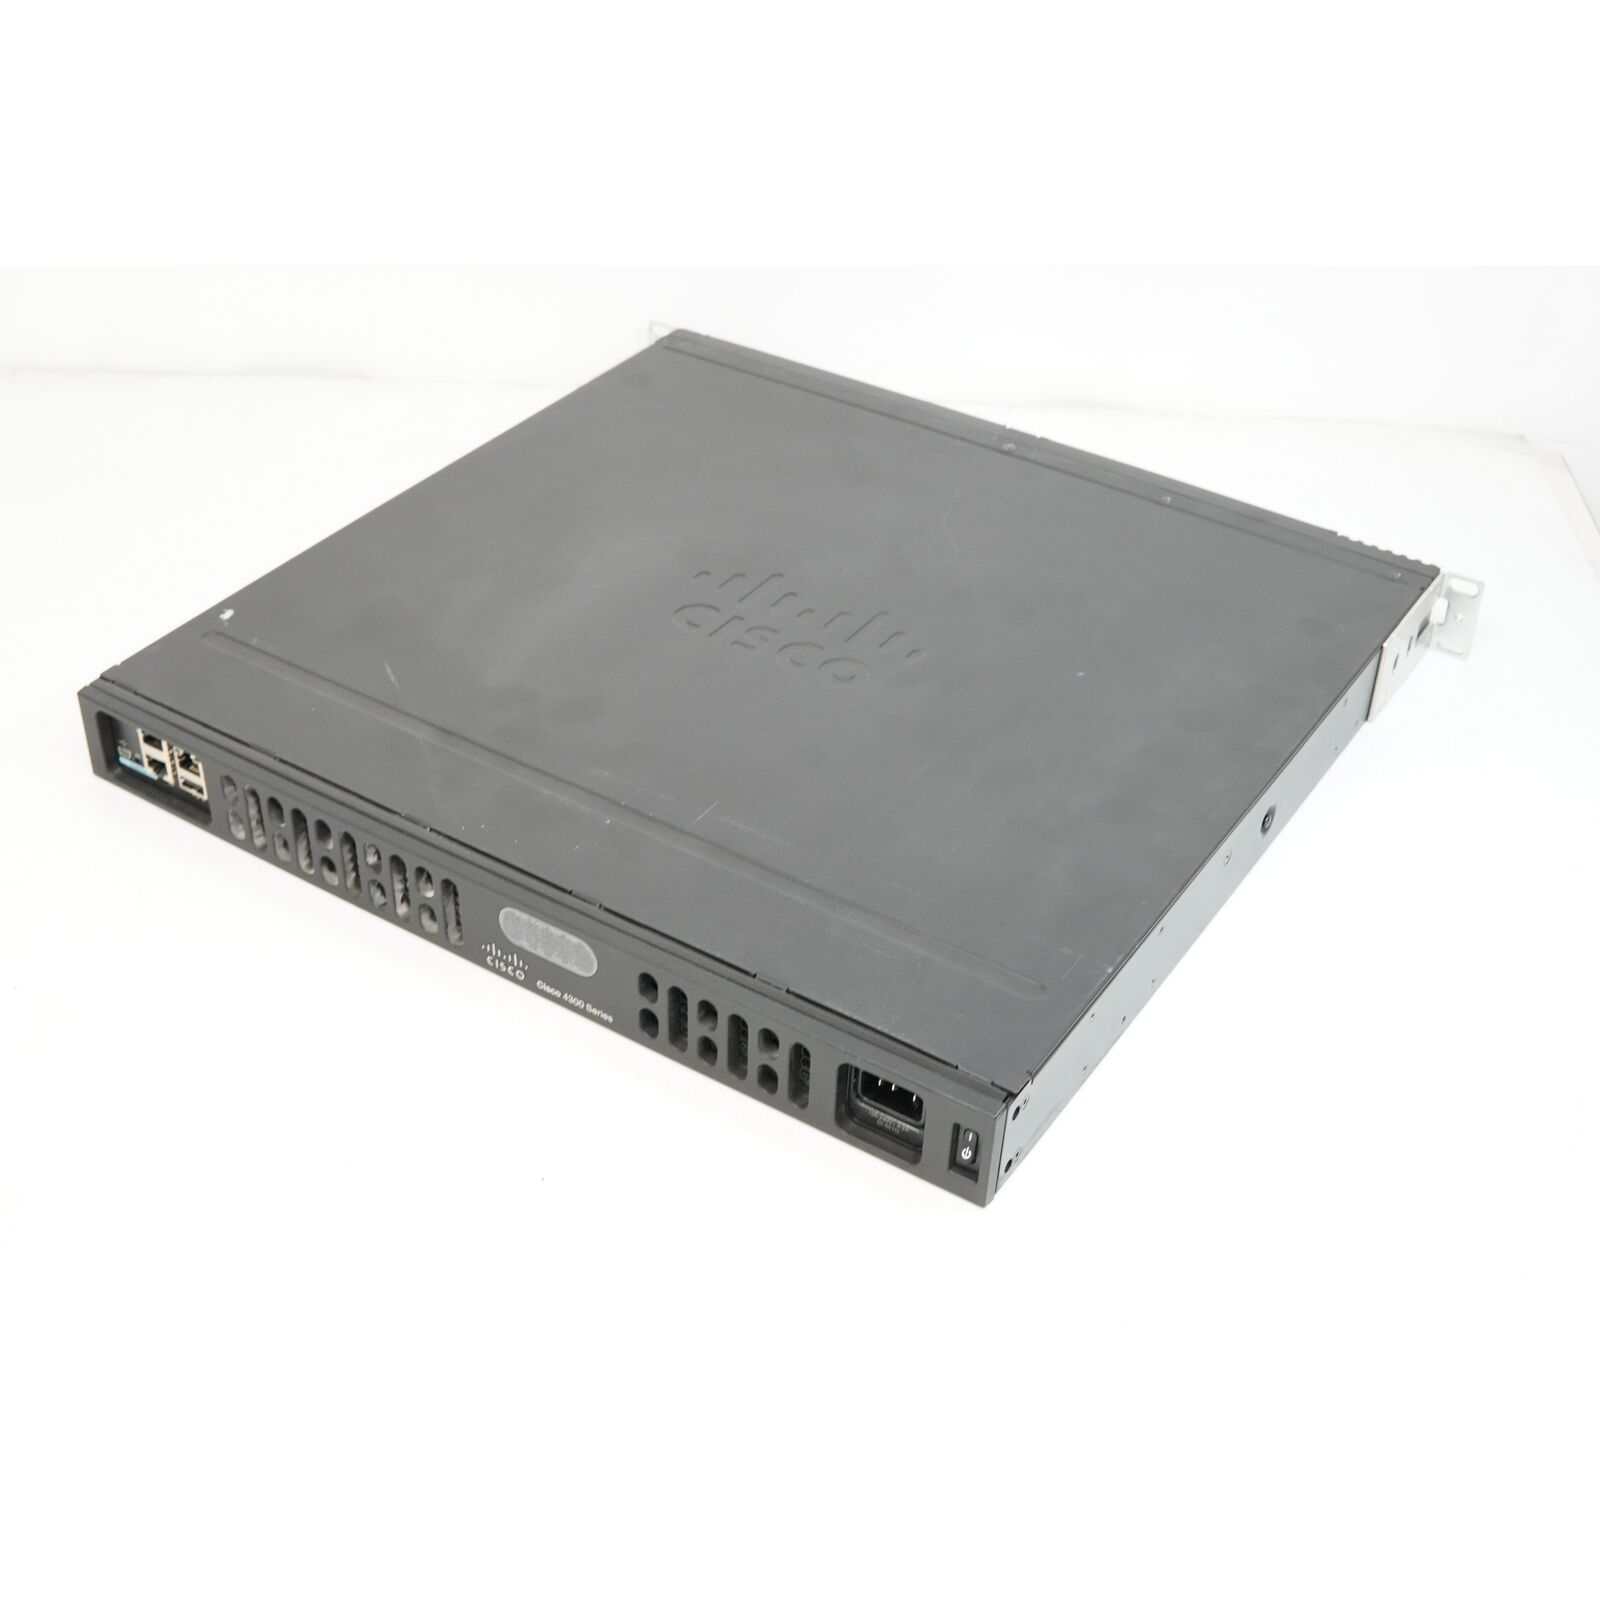 Cisco ISR4331/K9 ISR Router- NO CPU CLOCK ISSUE